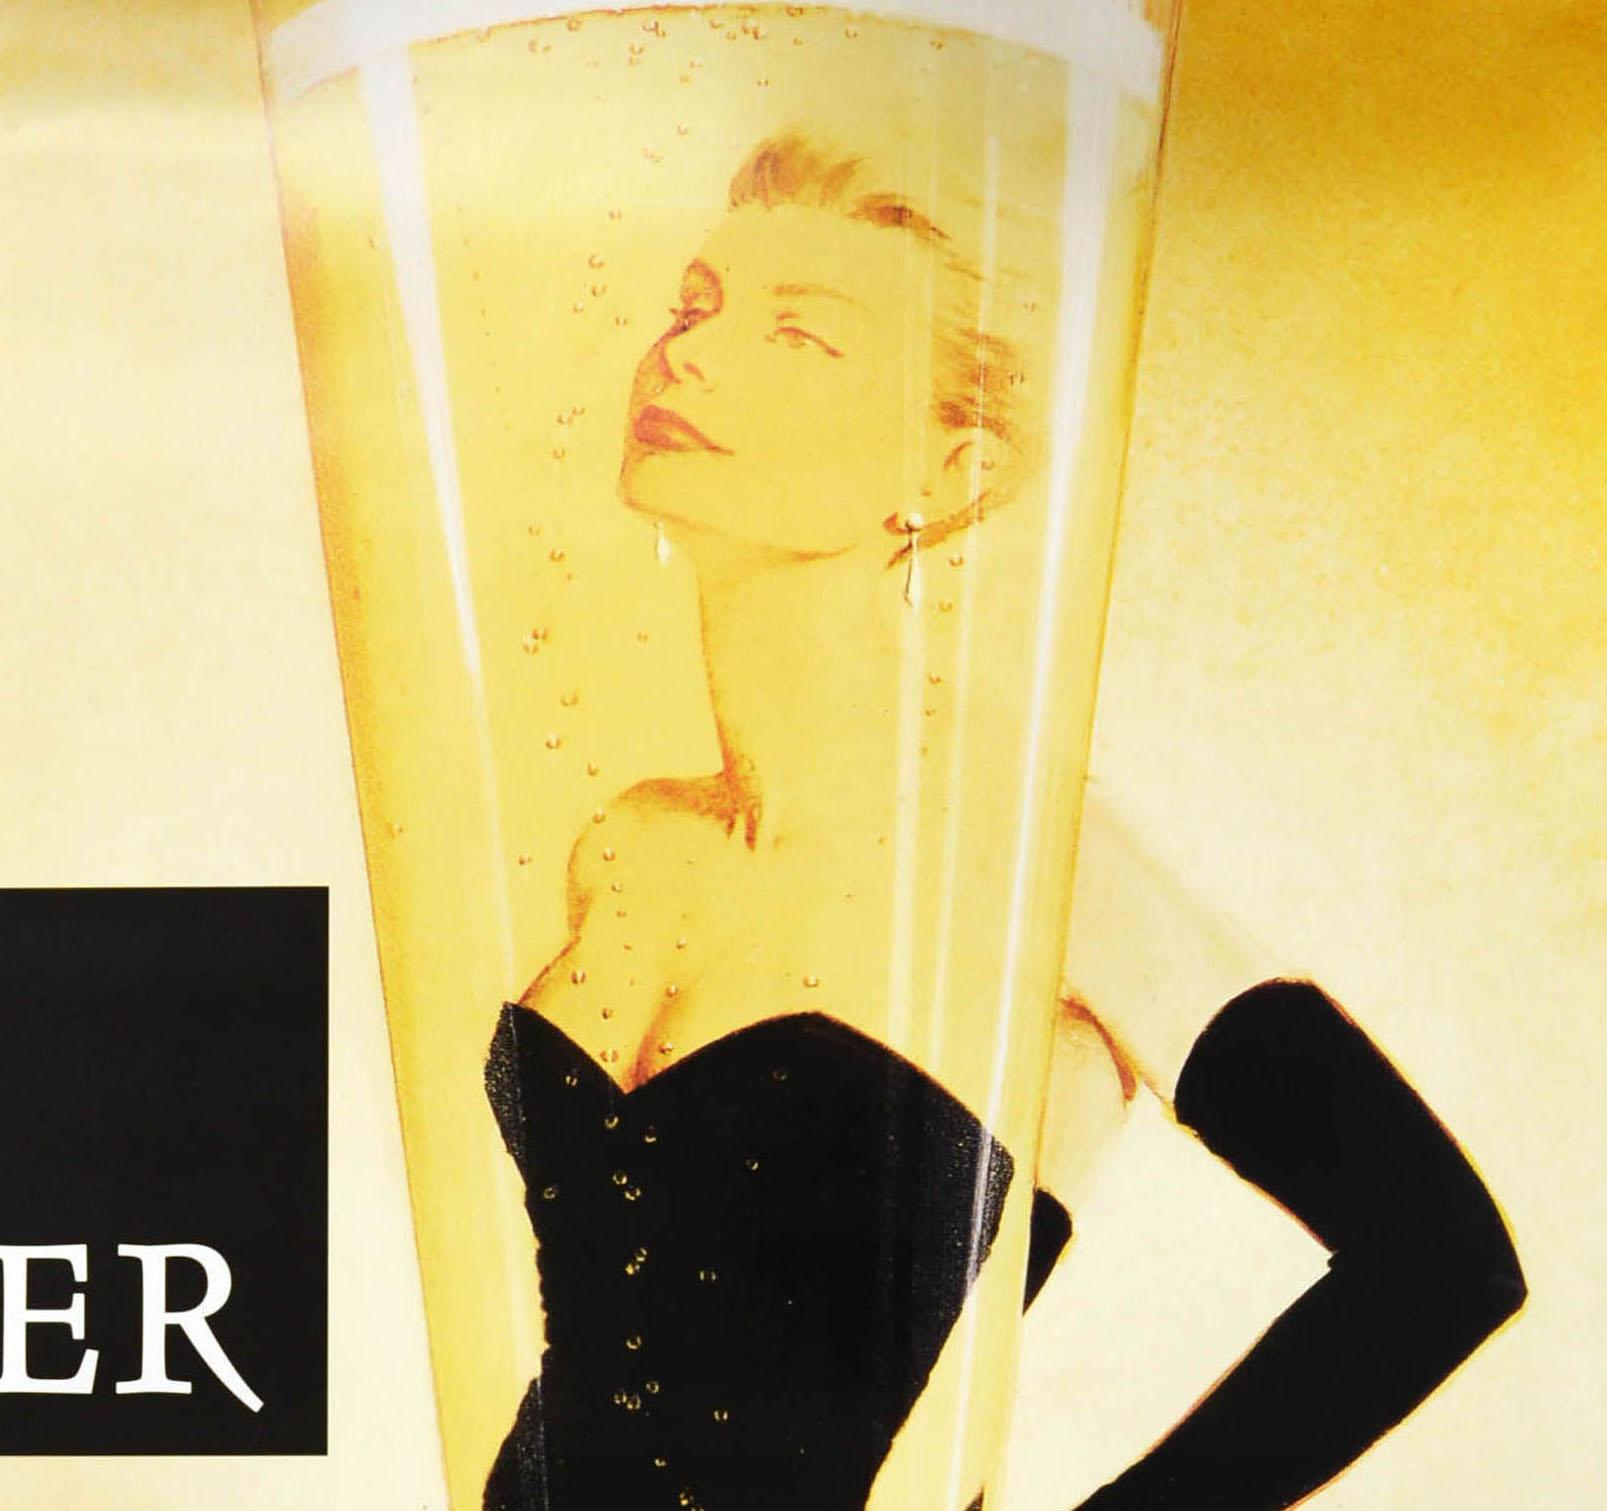 Original vintage drink advertising poster for Taittinger champagne - L'Instant Taittinger / The Taittinger Moment - featuring a classic image of an elegant lady wearing a fashionable black fishtail evening dress and long black gloves behind a glass